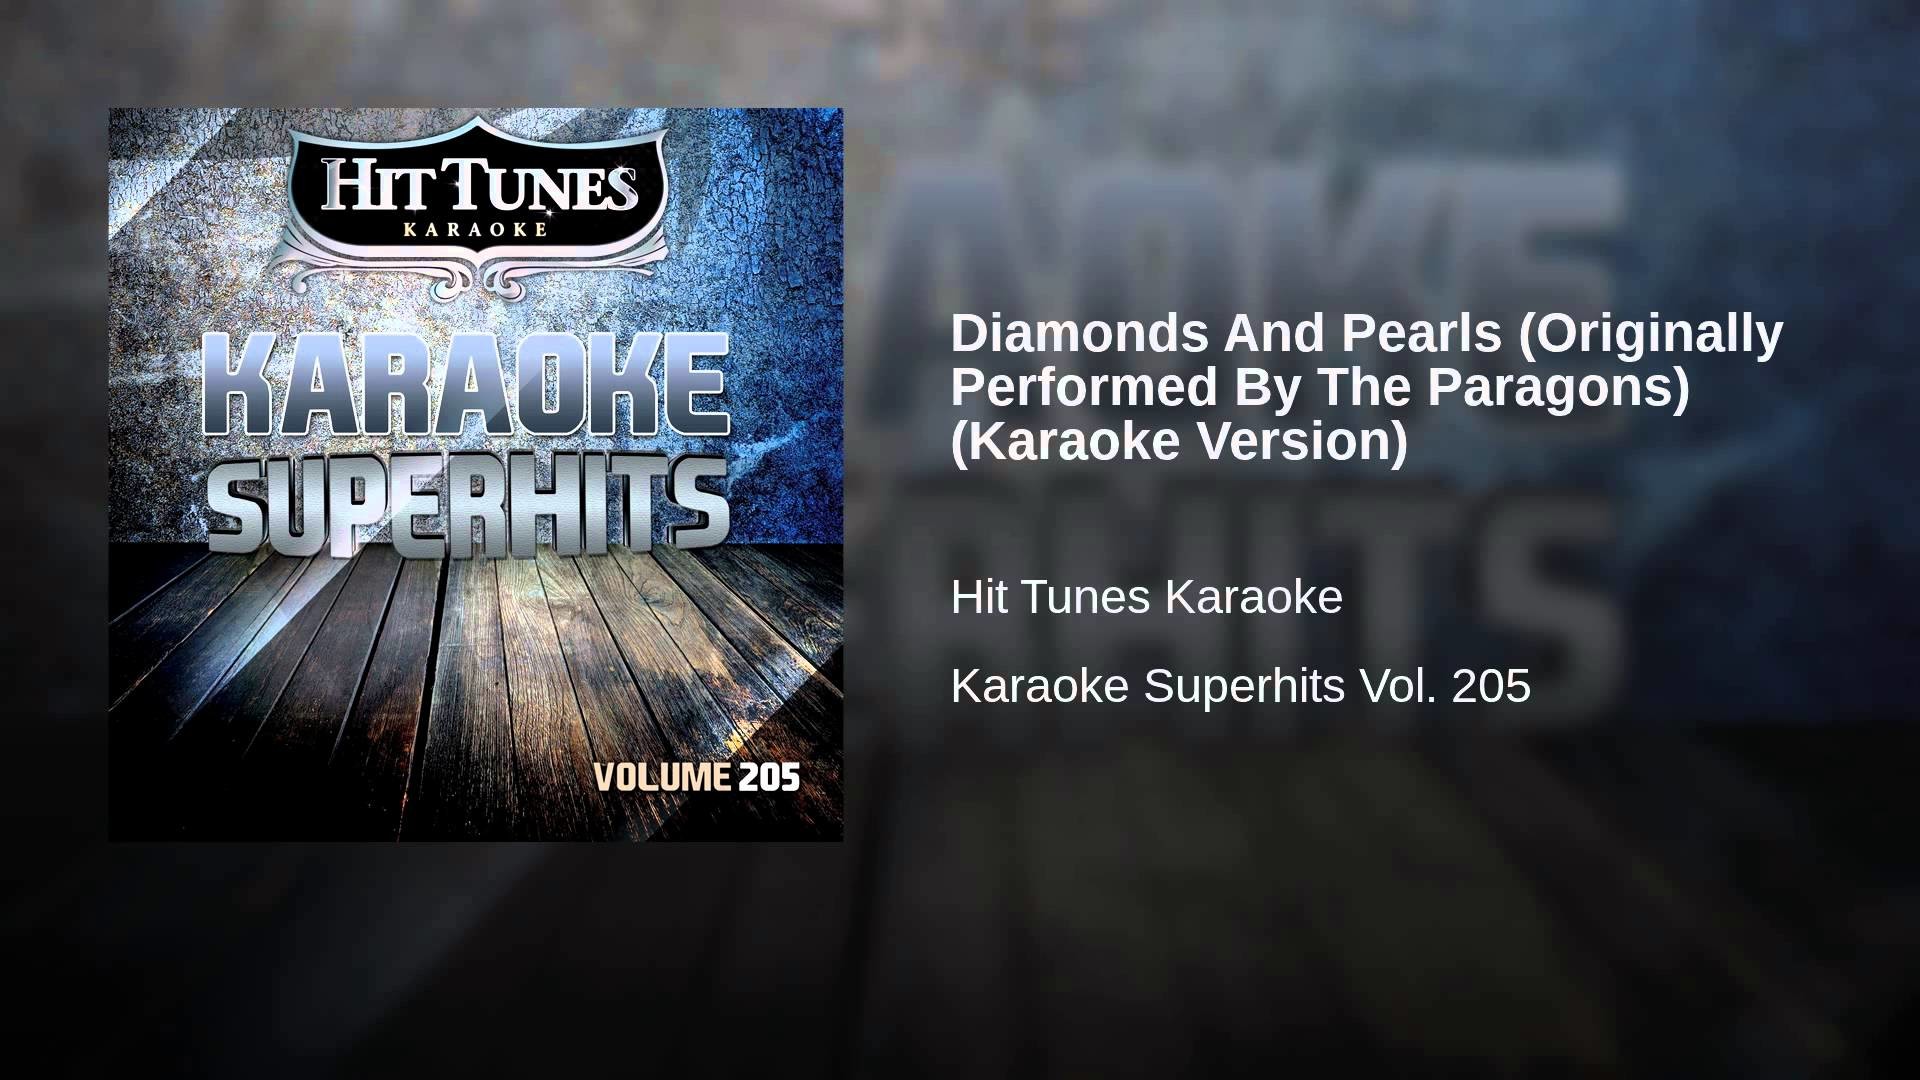 1920x1080 Diamonds And Pearls (Originally Performed By The Paragons) (Karaoke Version)